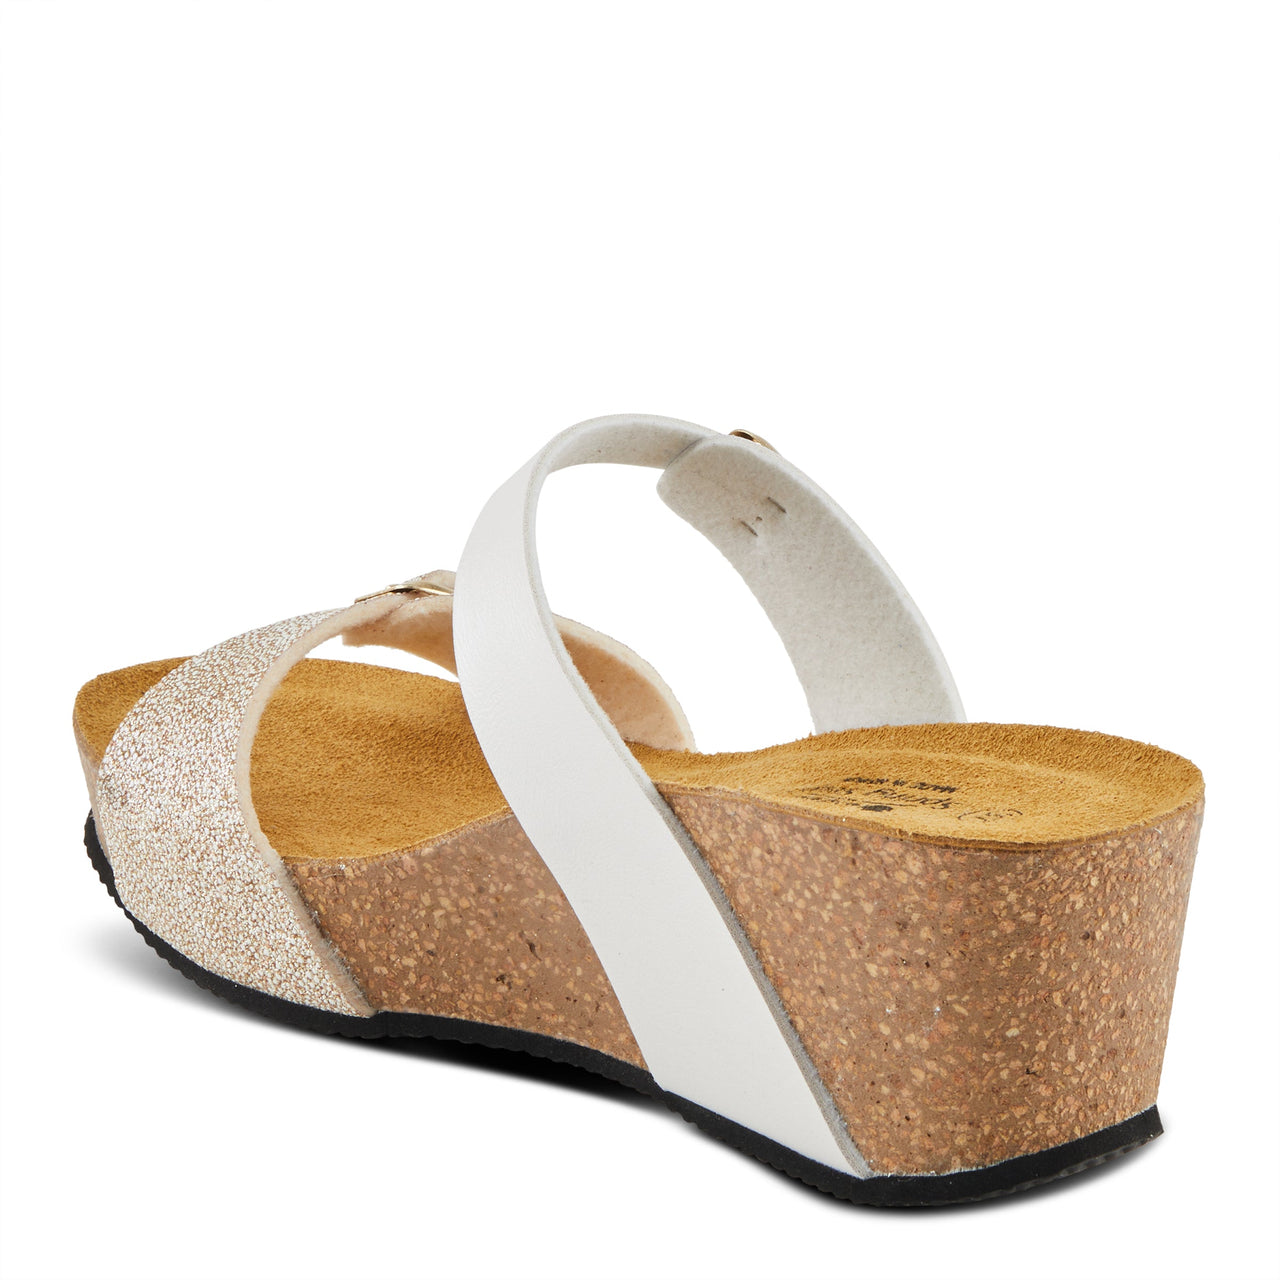 Elegant Spring Step Bynum Sandals with a modern peep-toe silhouette and durable traction outsoles